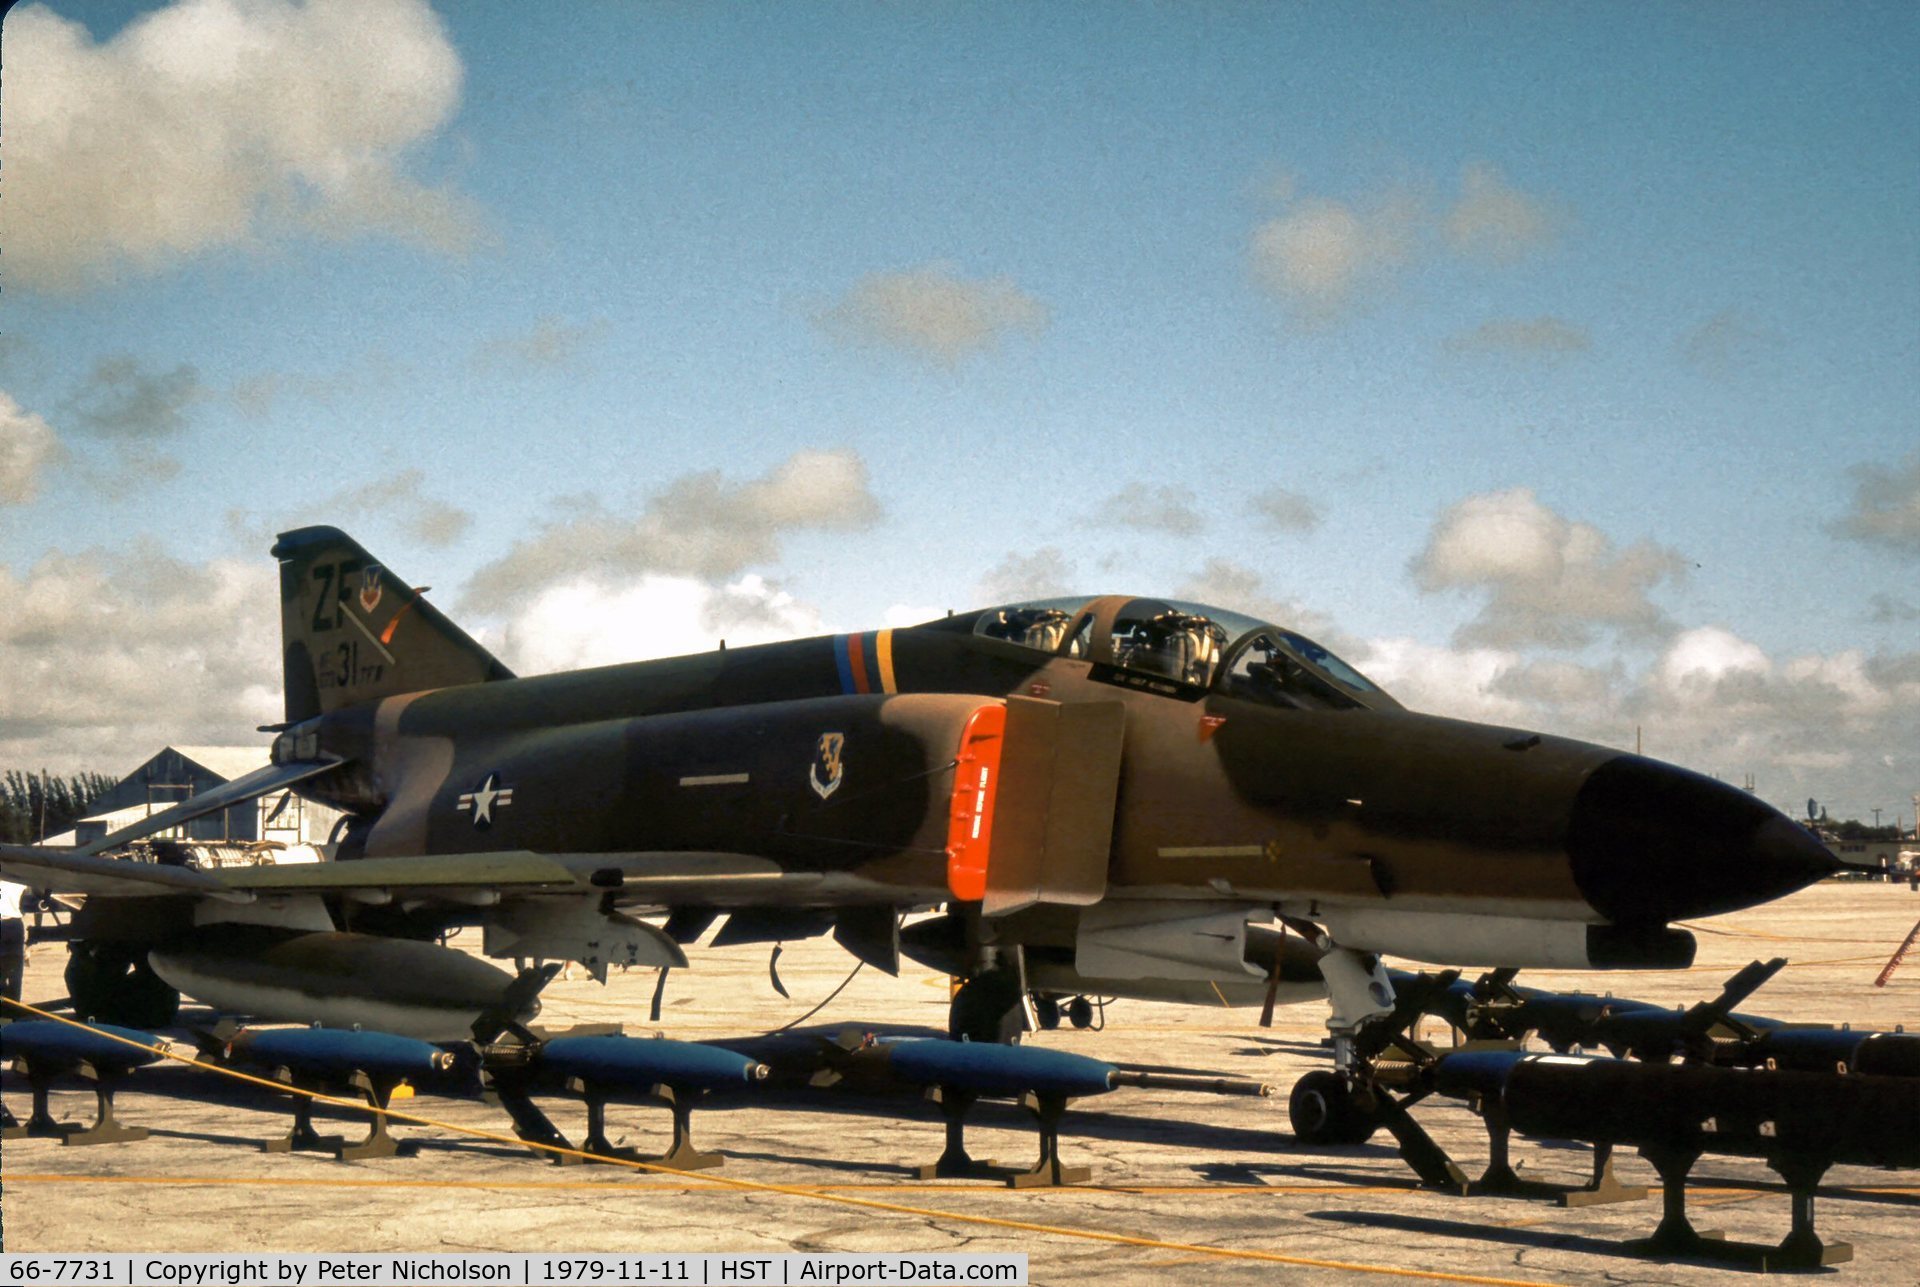 66-7731, 1966 McDonnell F-4D Phantom II C/N 2630, F-4D Phantom of 31st Tactical Fighter Wing at the 1979 Homestead AFB Open House.